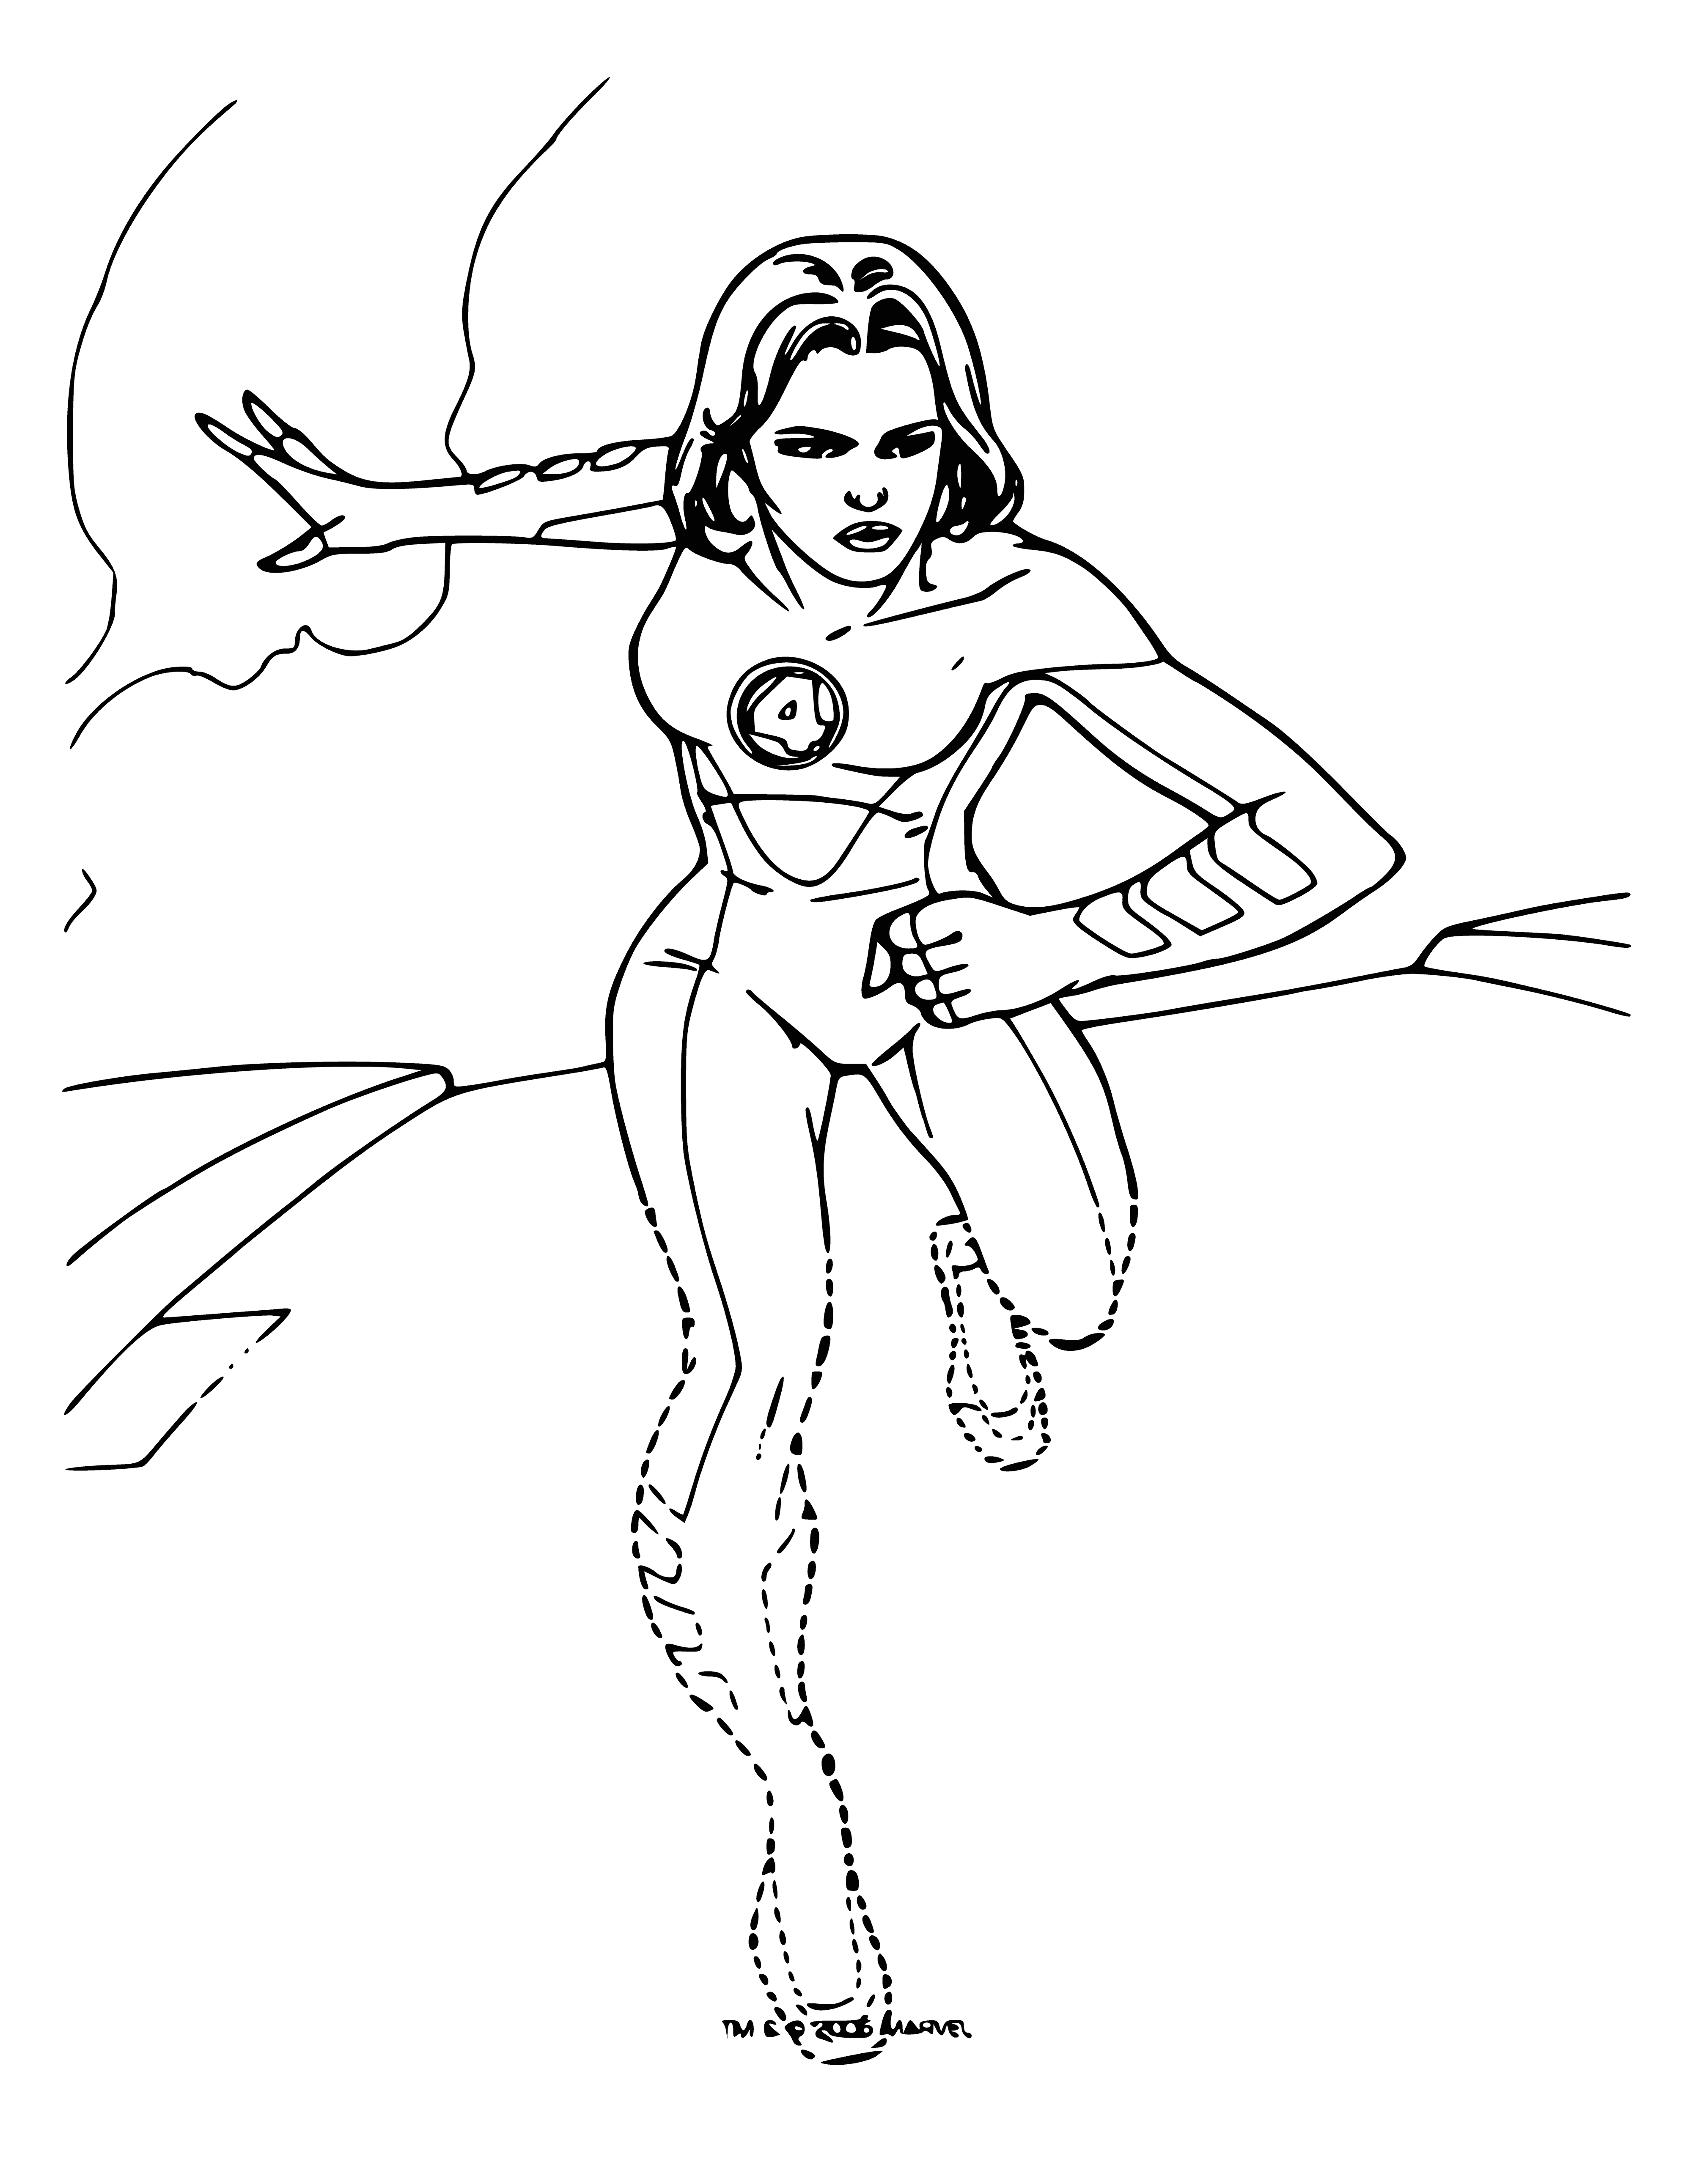 coloring page: Fantastic Four - Invisible: Superhero team masters of invisibility fighting crime and protecting innocents, always ready to take on whatever comes their way.